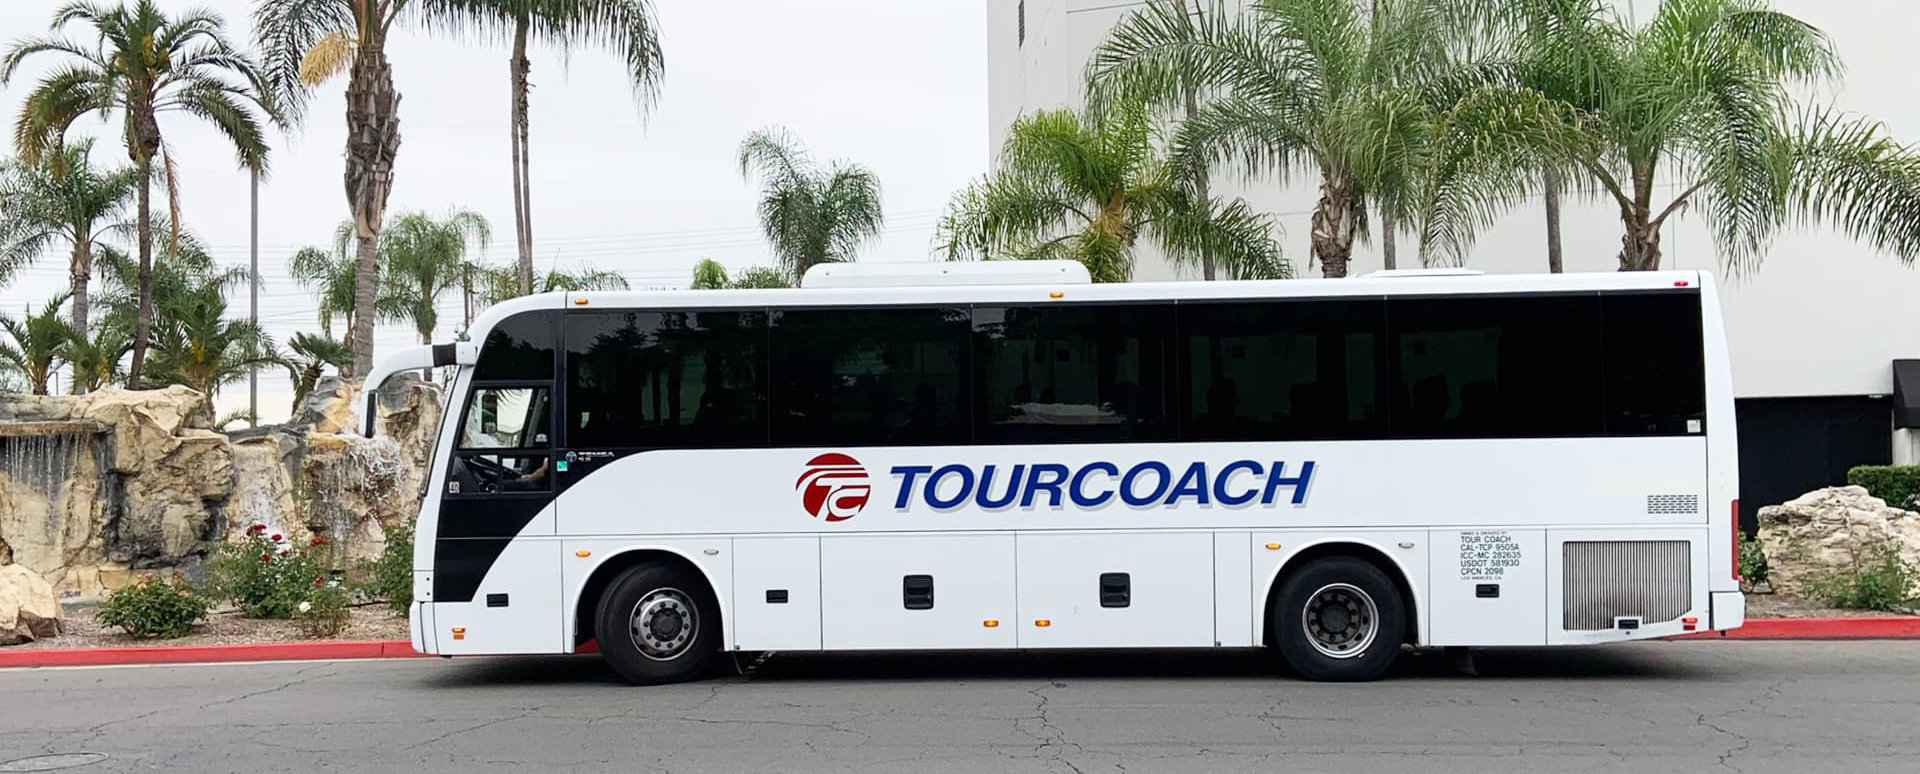 Tour Coach bus parked on side of palm tree lined road